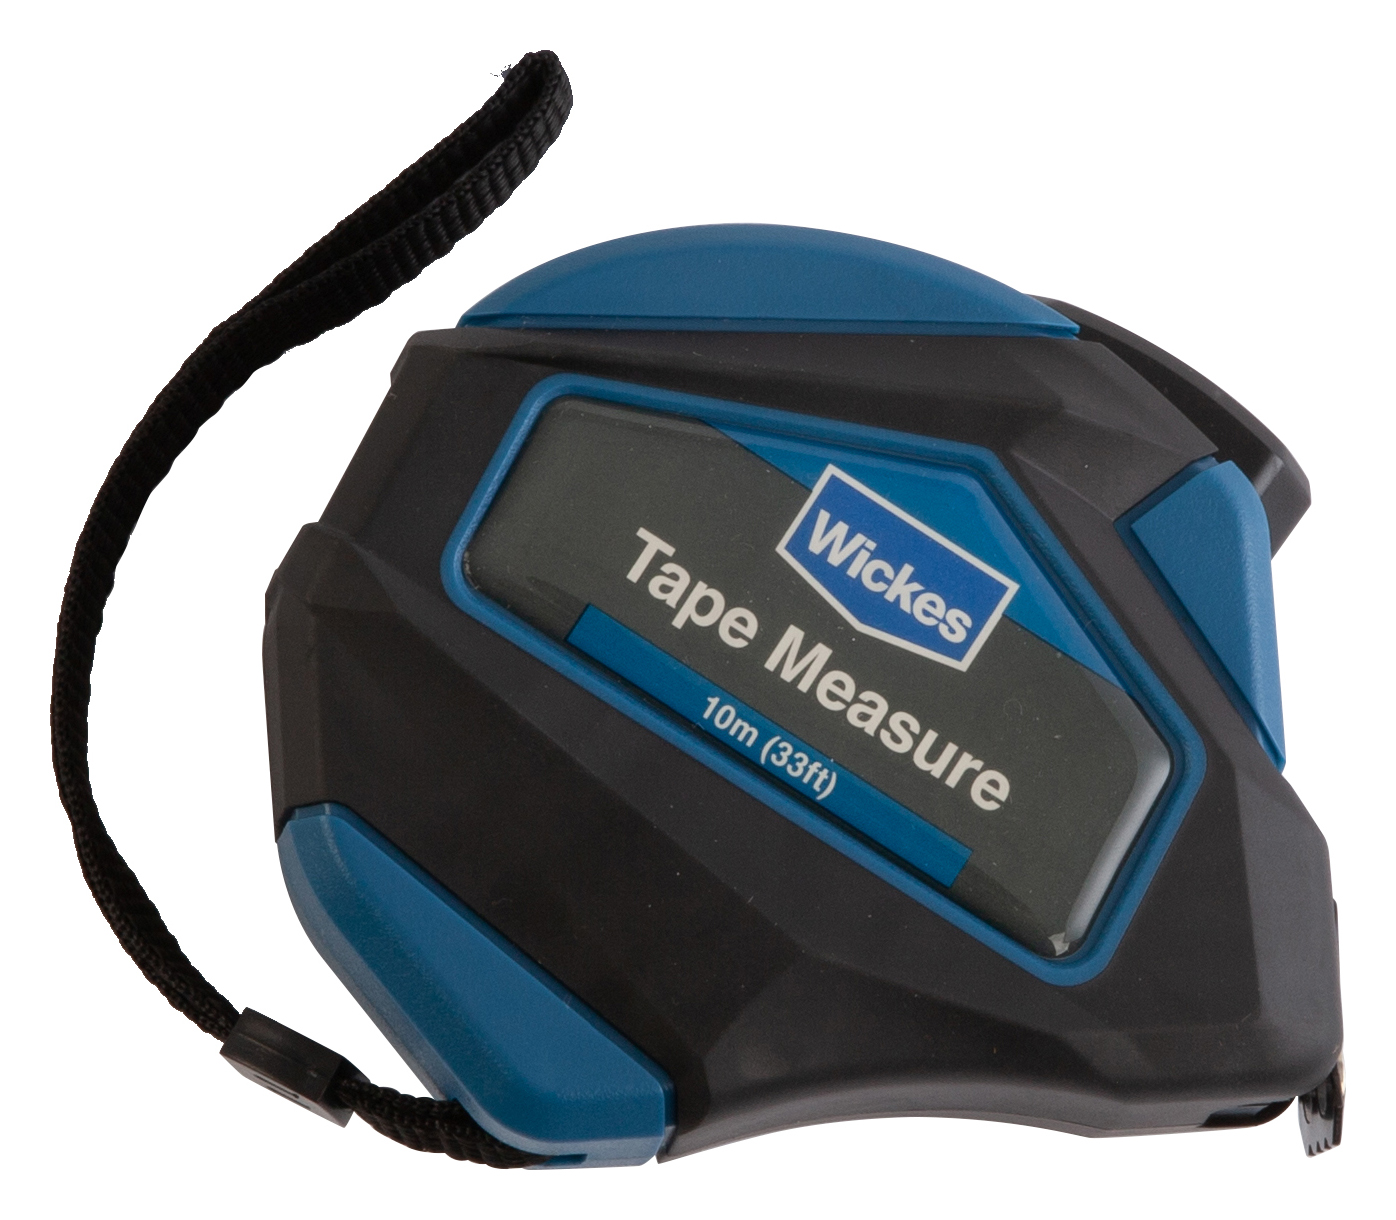 Image of Wickes Rugged Tape Measure - 10m / 32ft